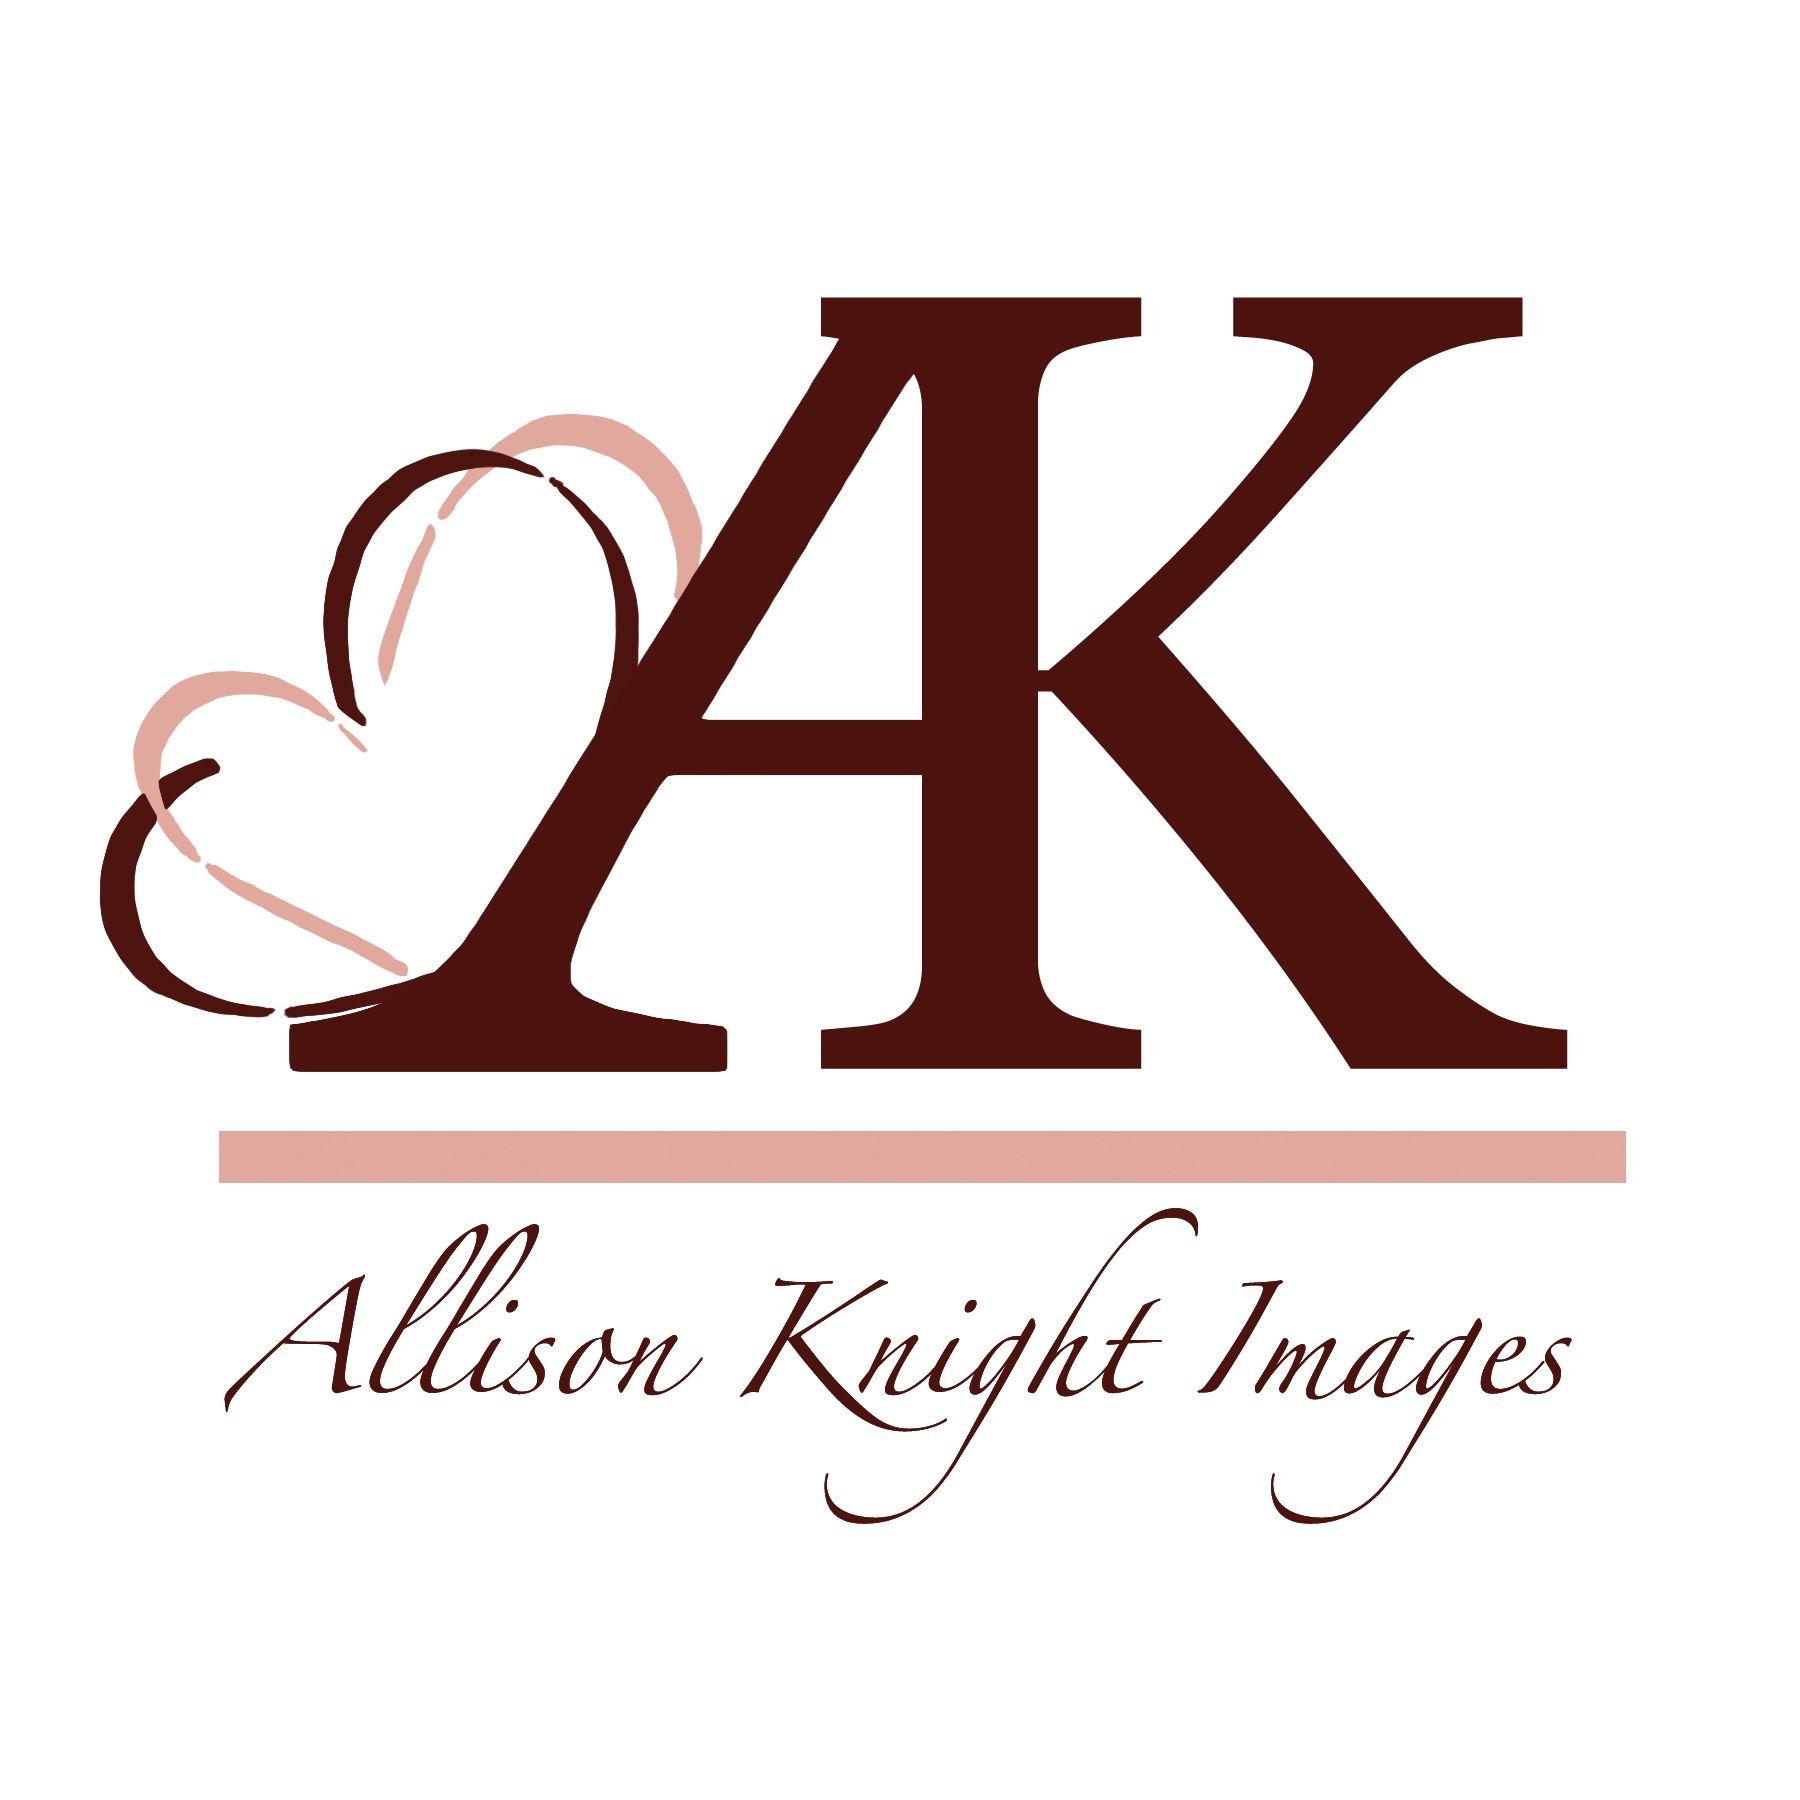 Word New Logo - Introducing My New Logo | Allison Knight Images